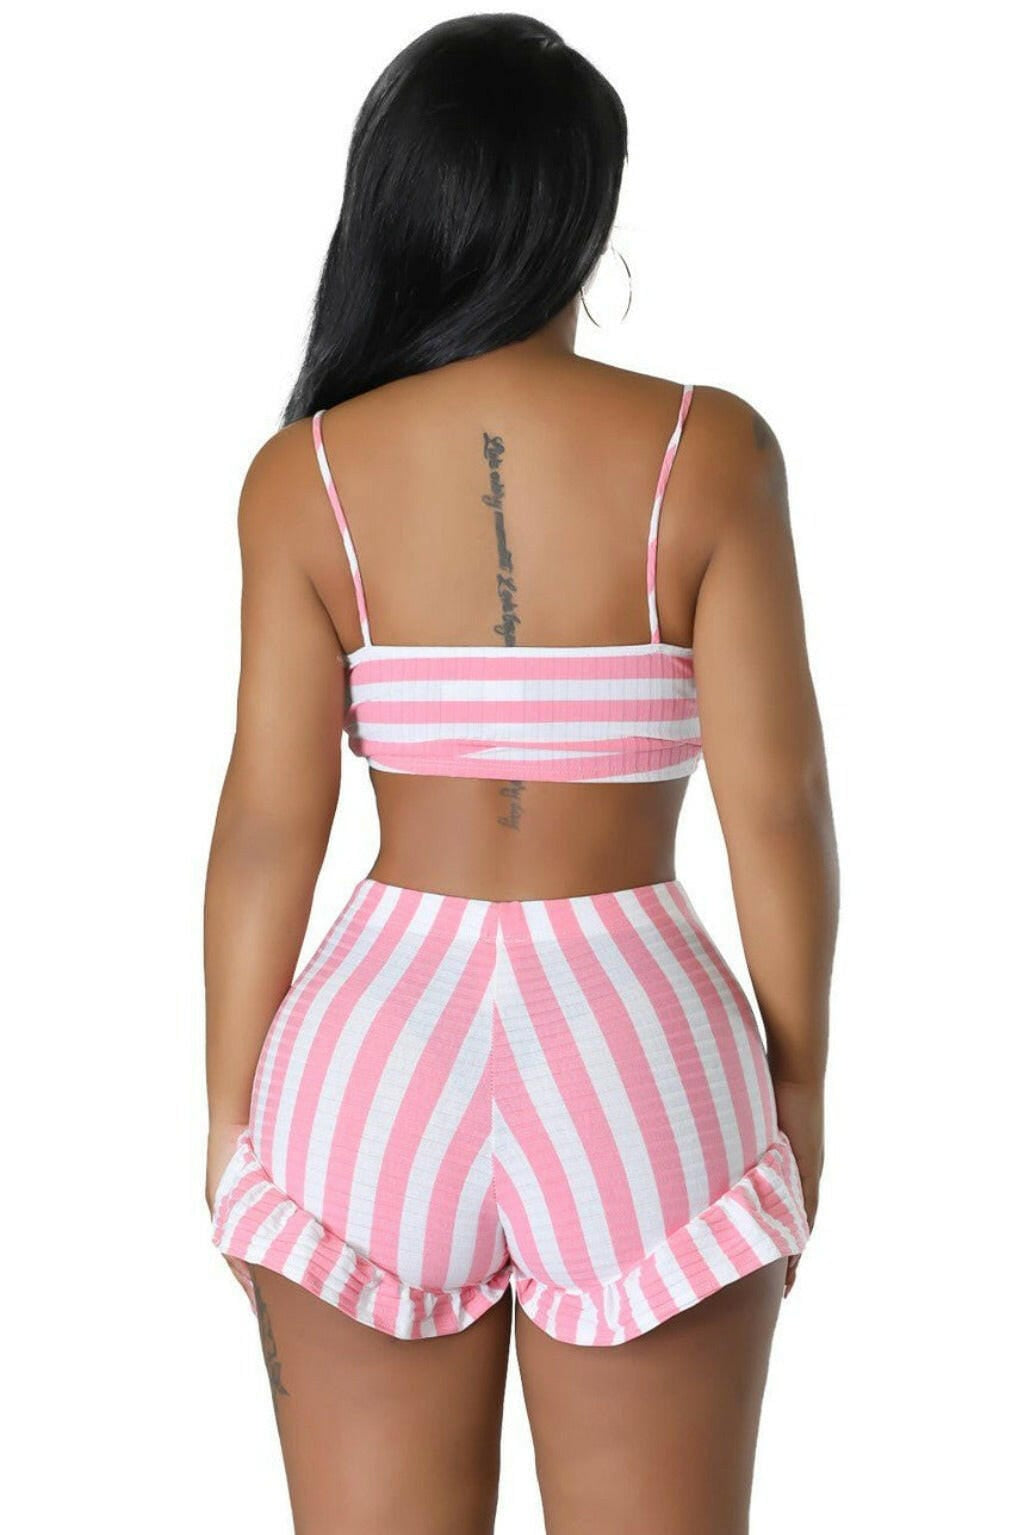 Epicplacess Shorts Better Believe It Shorts Outfift Set - Pink